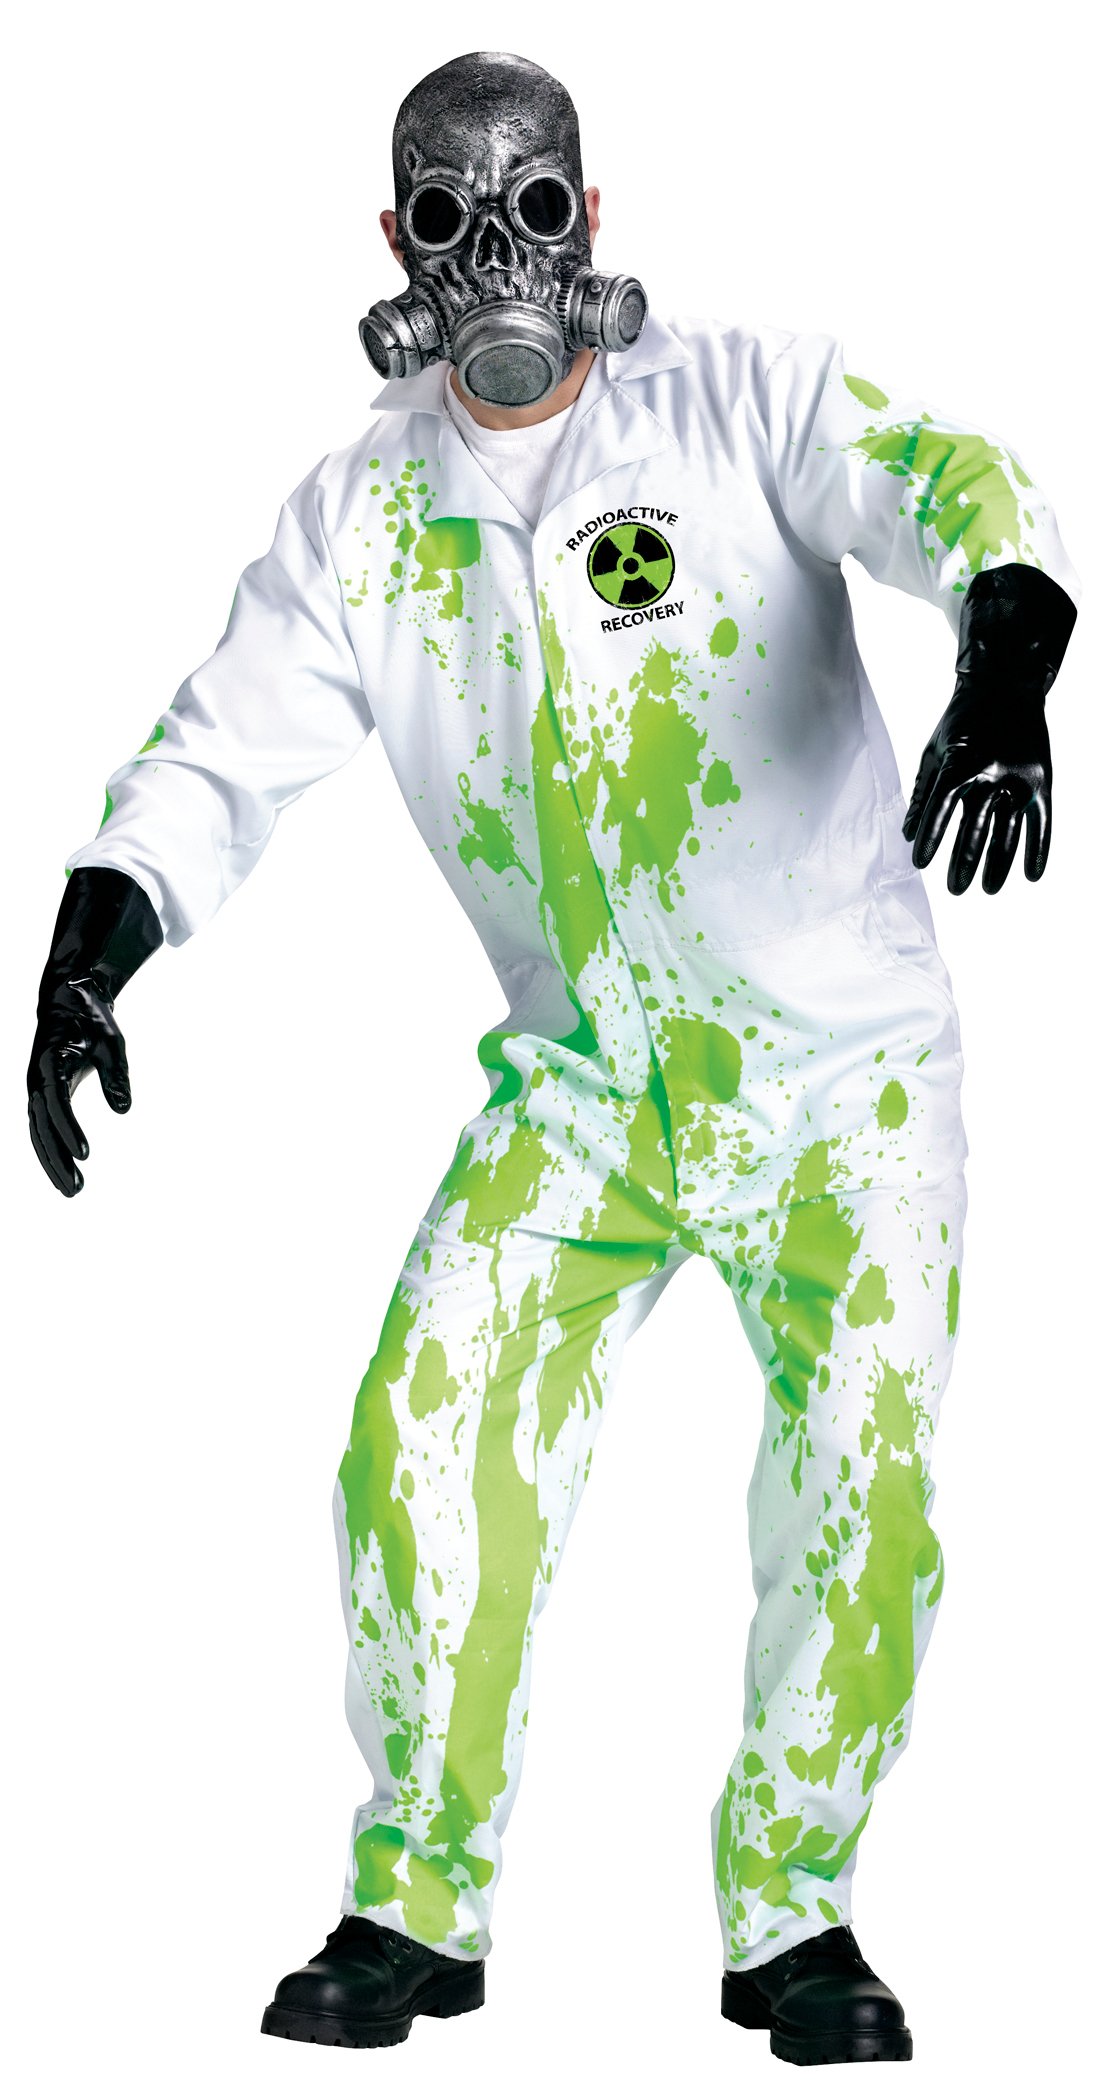 Radioactive Recovery Team Adult Costume